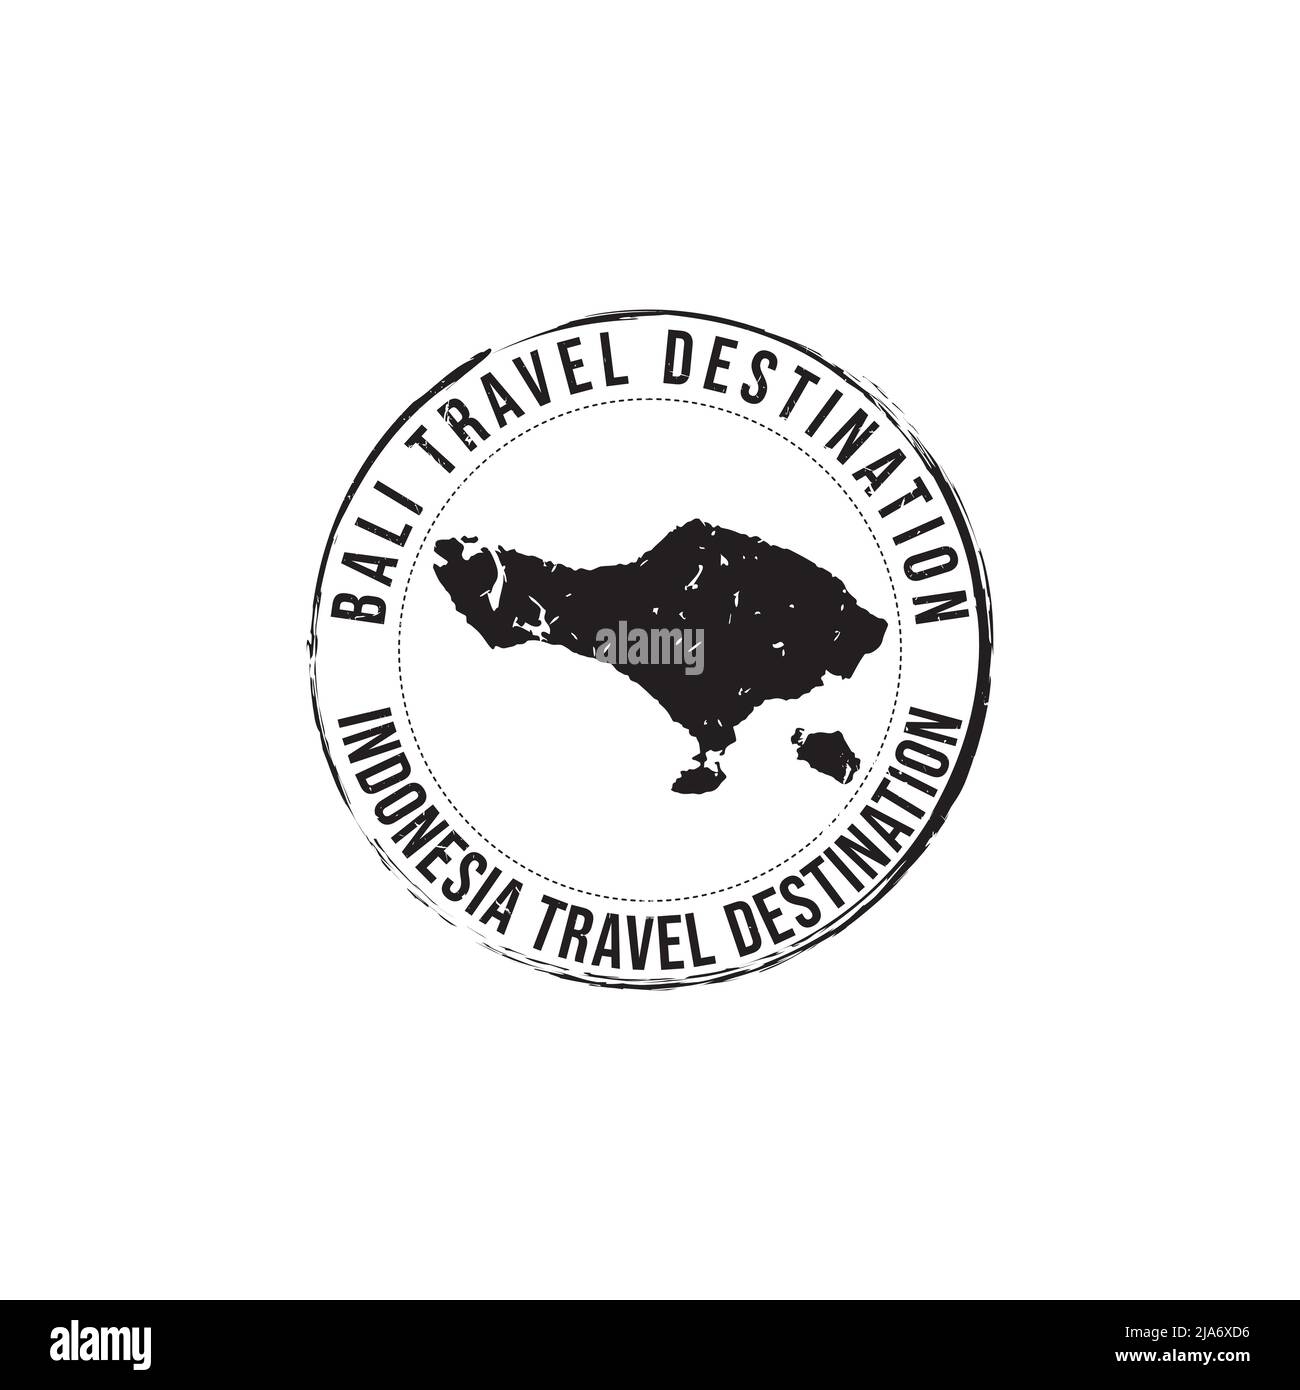 Bali logo sign. Travel rubber stamp with the name and map of island, vector illustration. Can be used as insignia, logotype, label, sticker or badge. Stock Vector